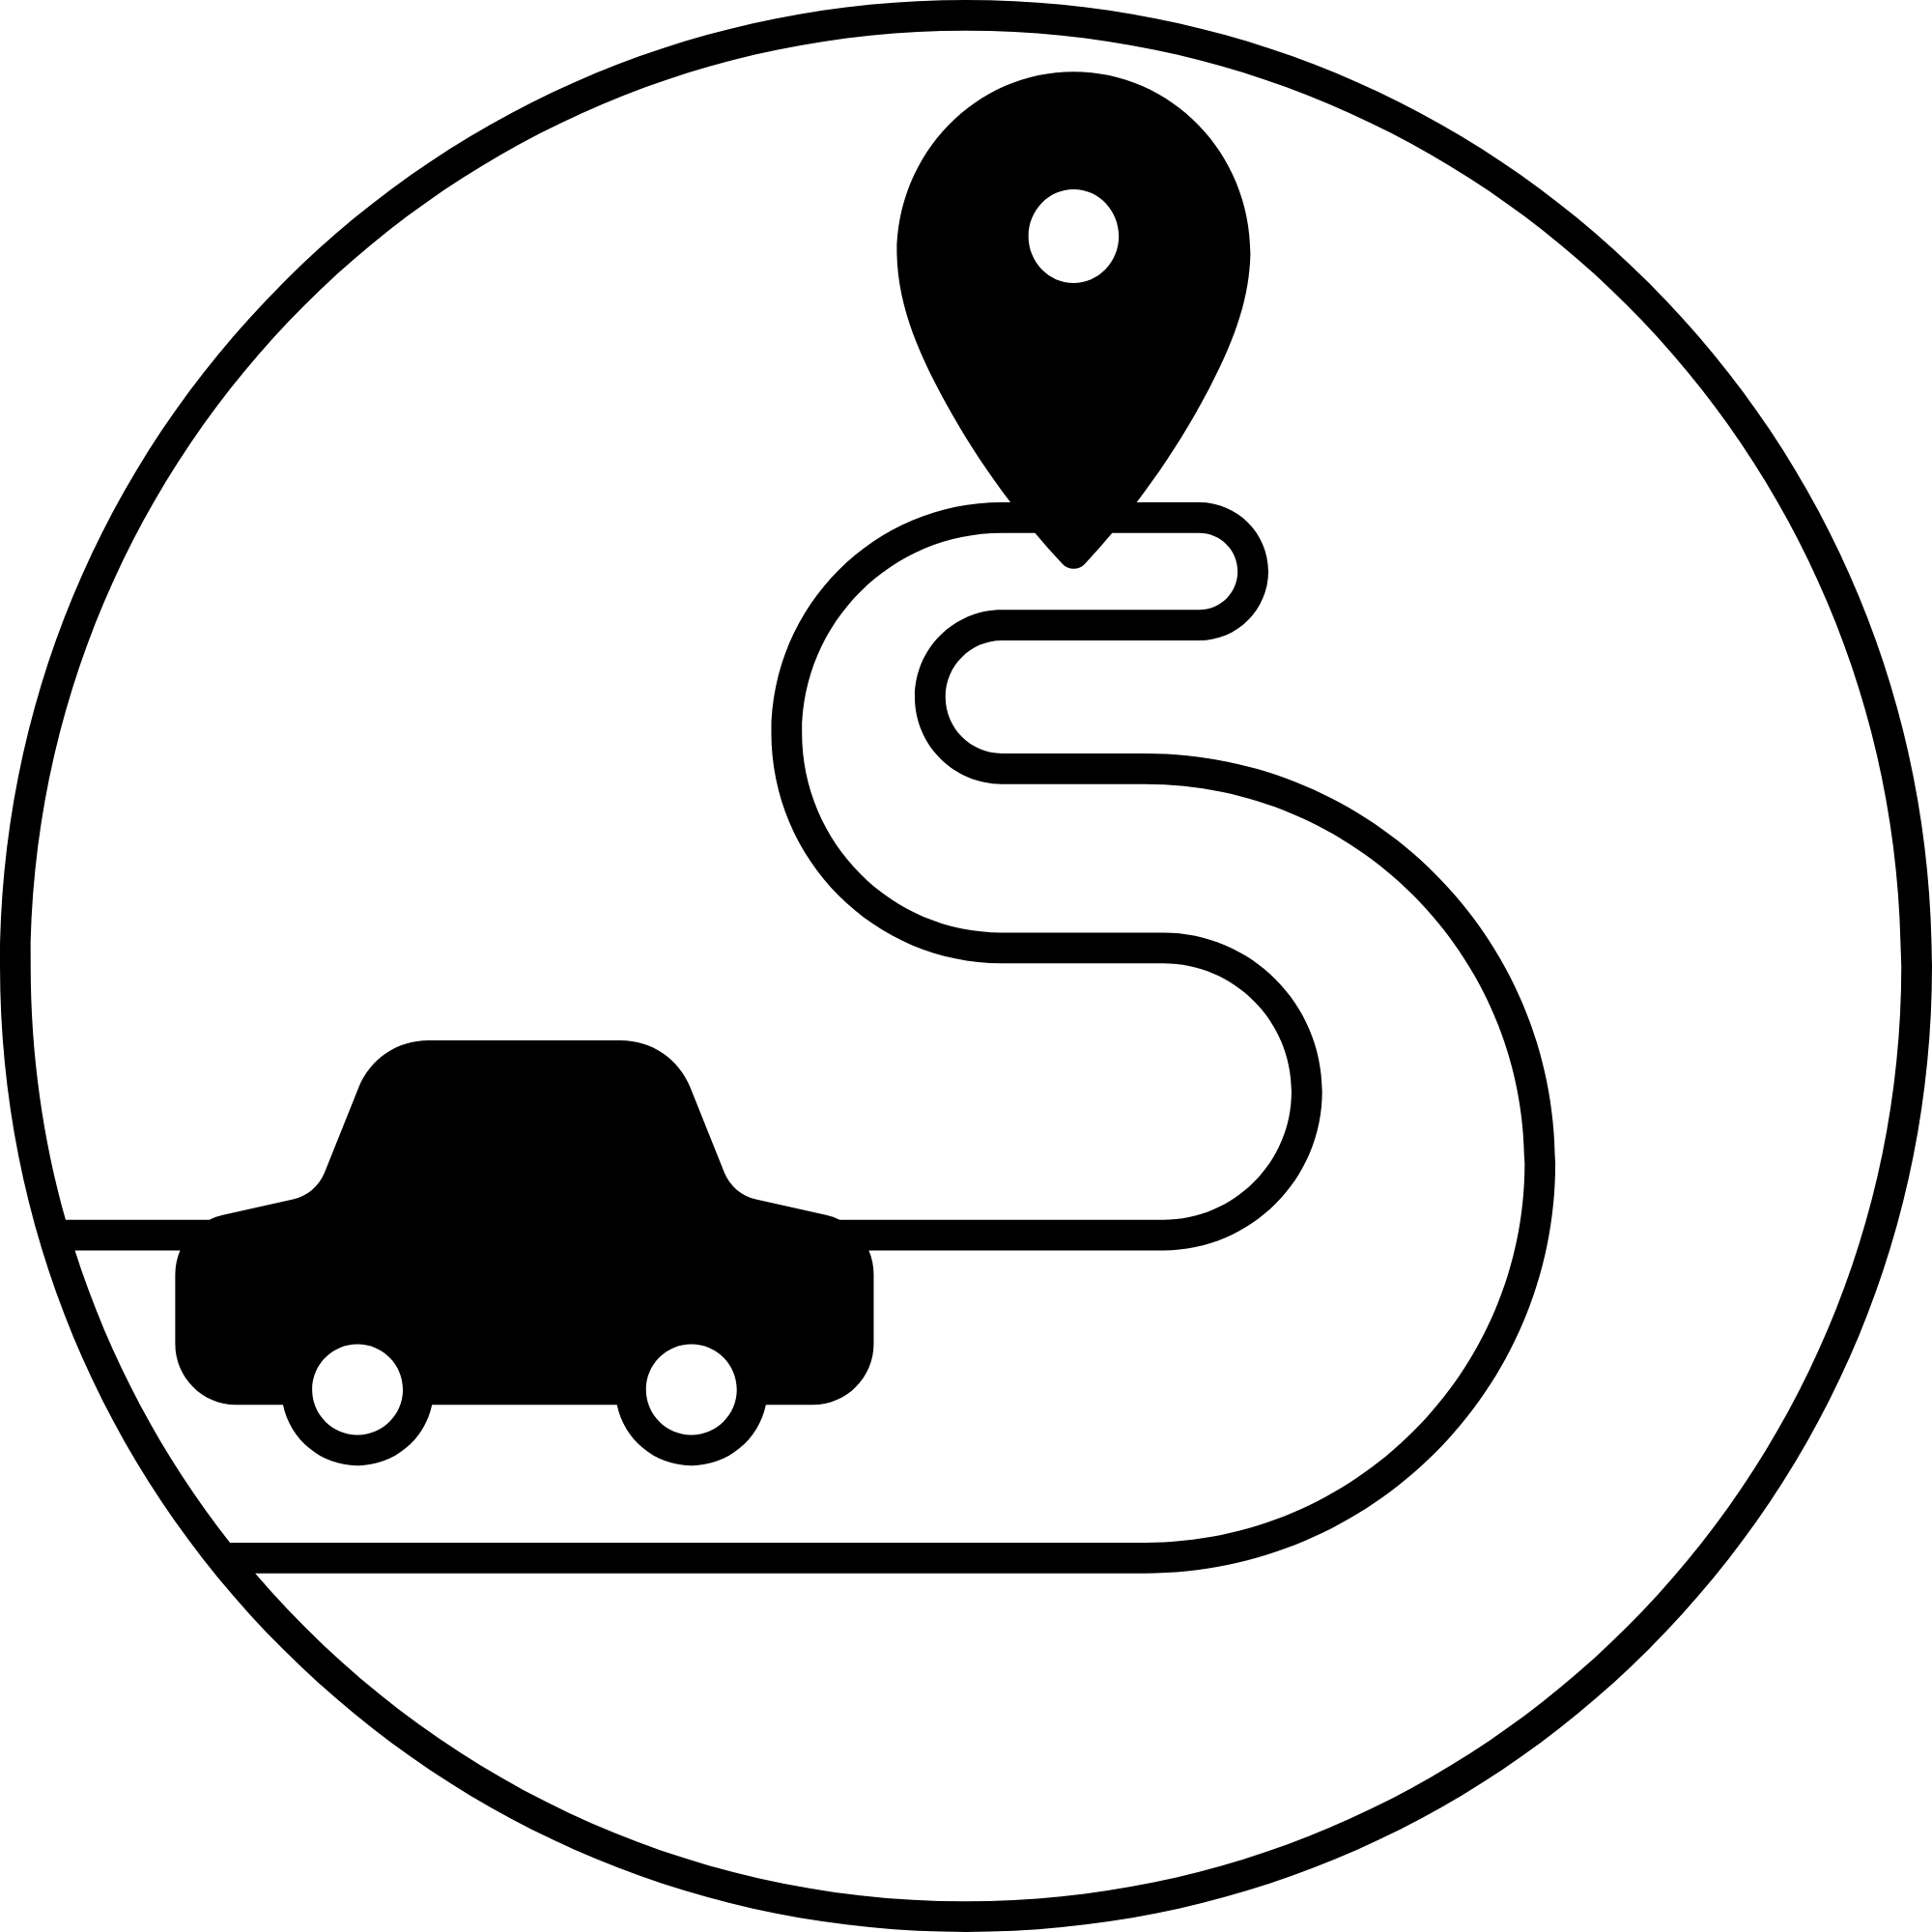 Basic line-graphic of a car driving on a road to a destination pin